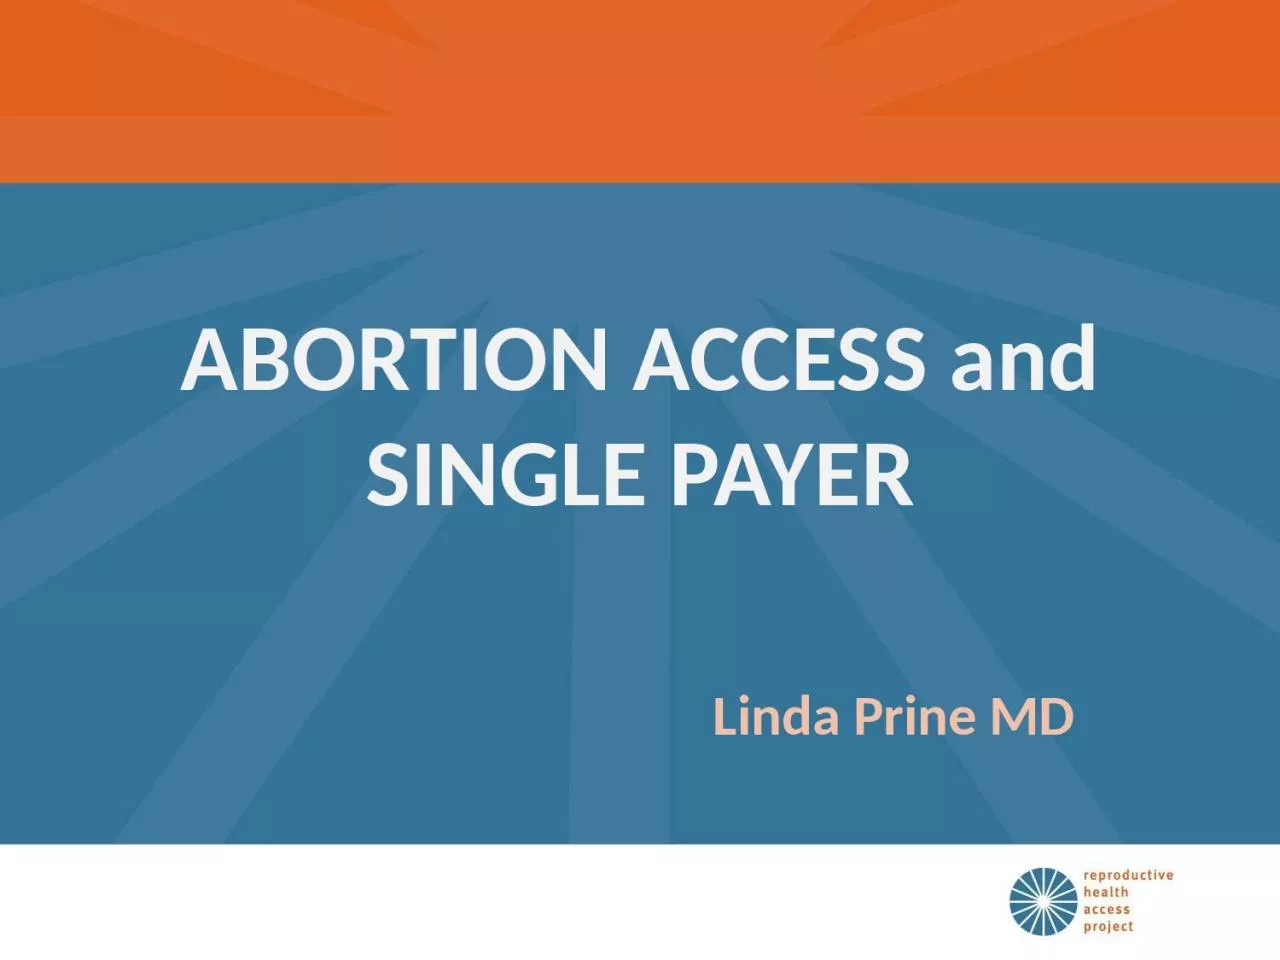 ABORTION ACCESS and SINGLE PAYER